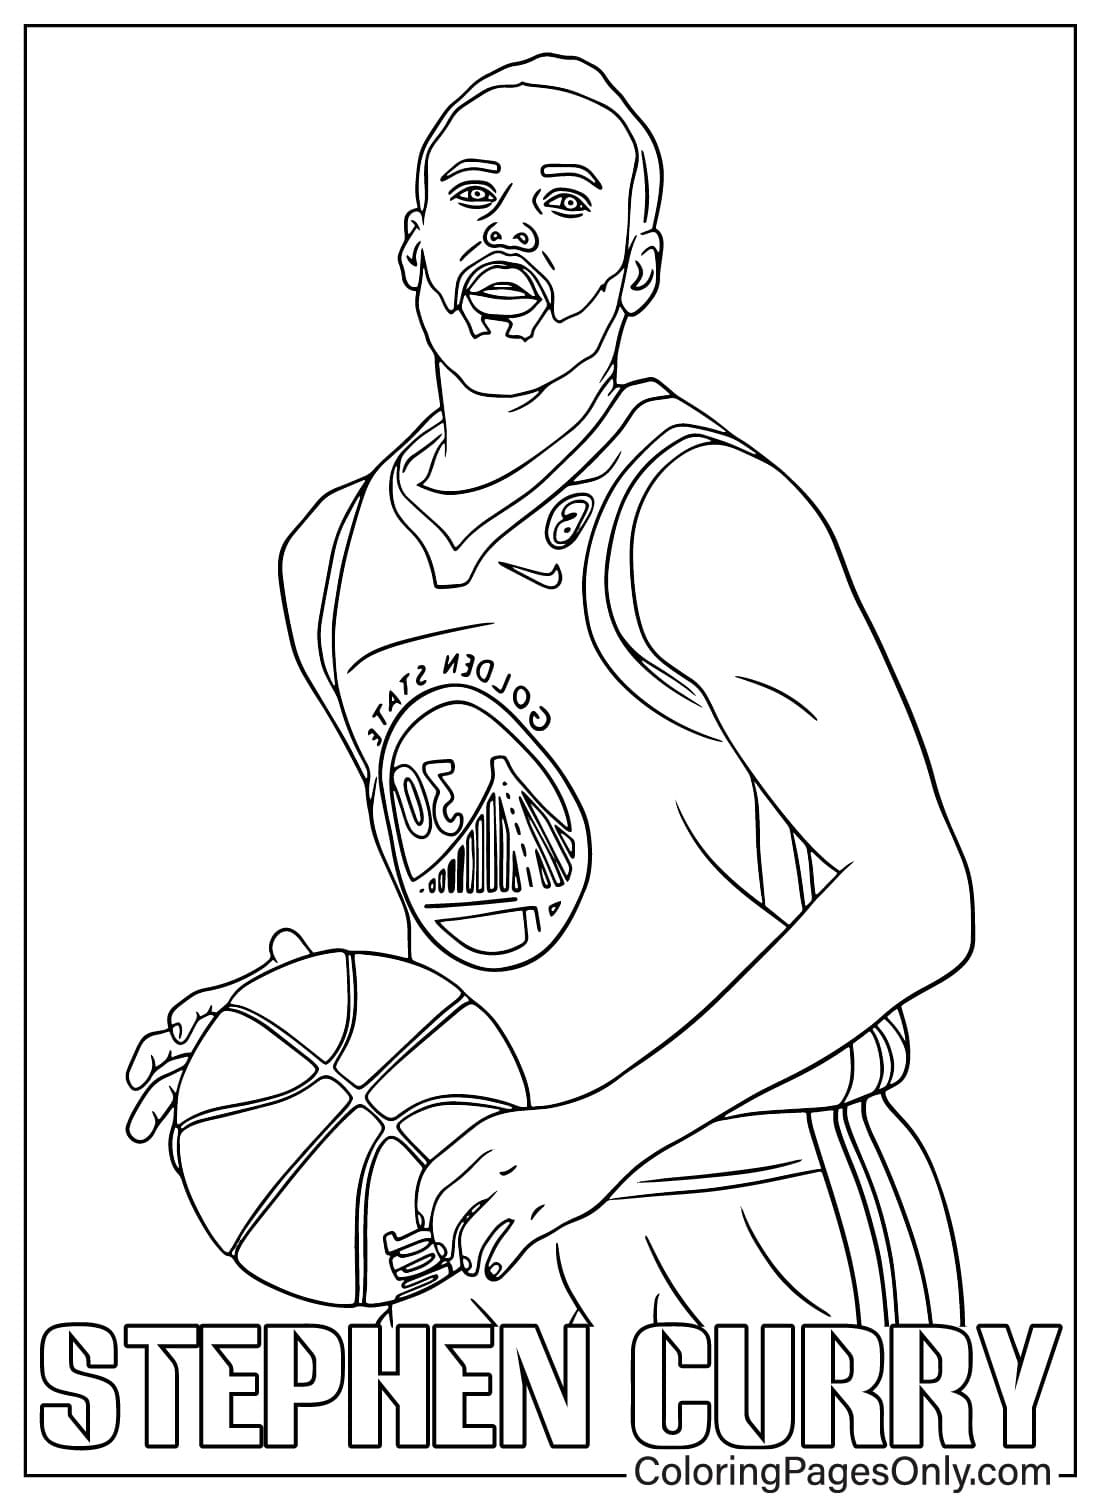 Stephen Curry Coloring Sheet for Kids - Free Printable Coloring Pages